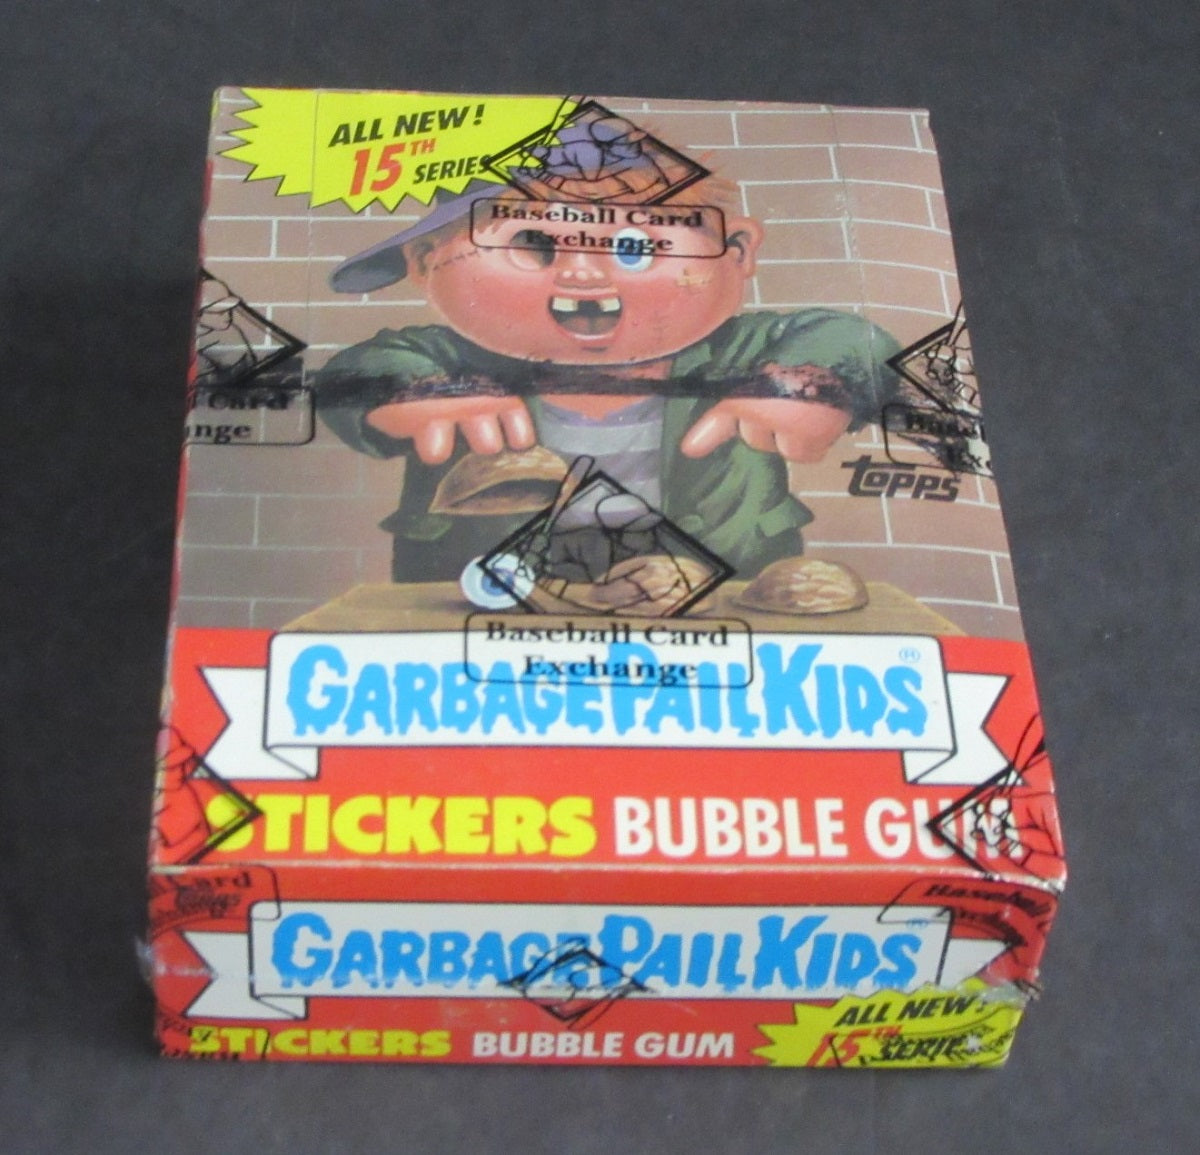 1988 Topps Garbage Pail Kids Series 15 Unopened Wax Box (w/ price) (X-Out) (Poster) (BBCE)